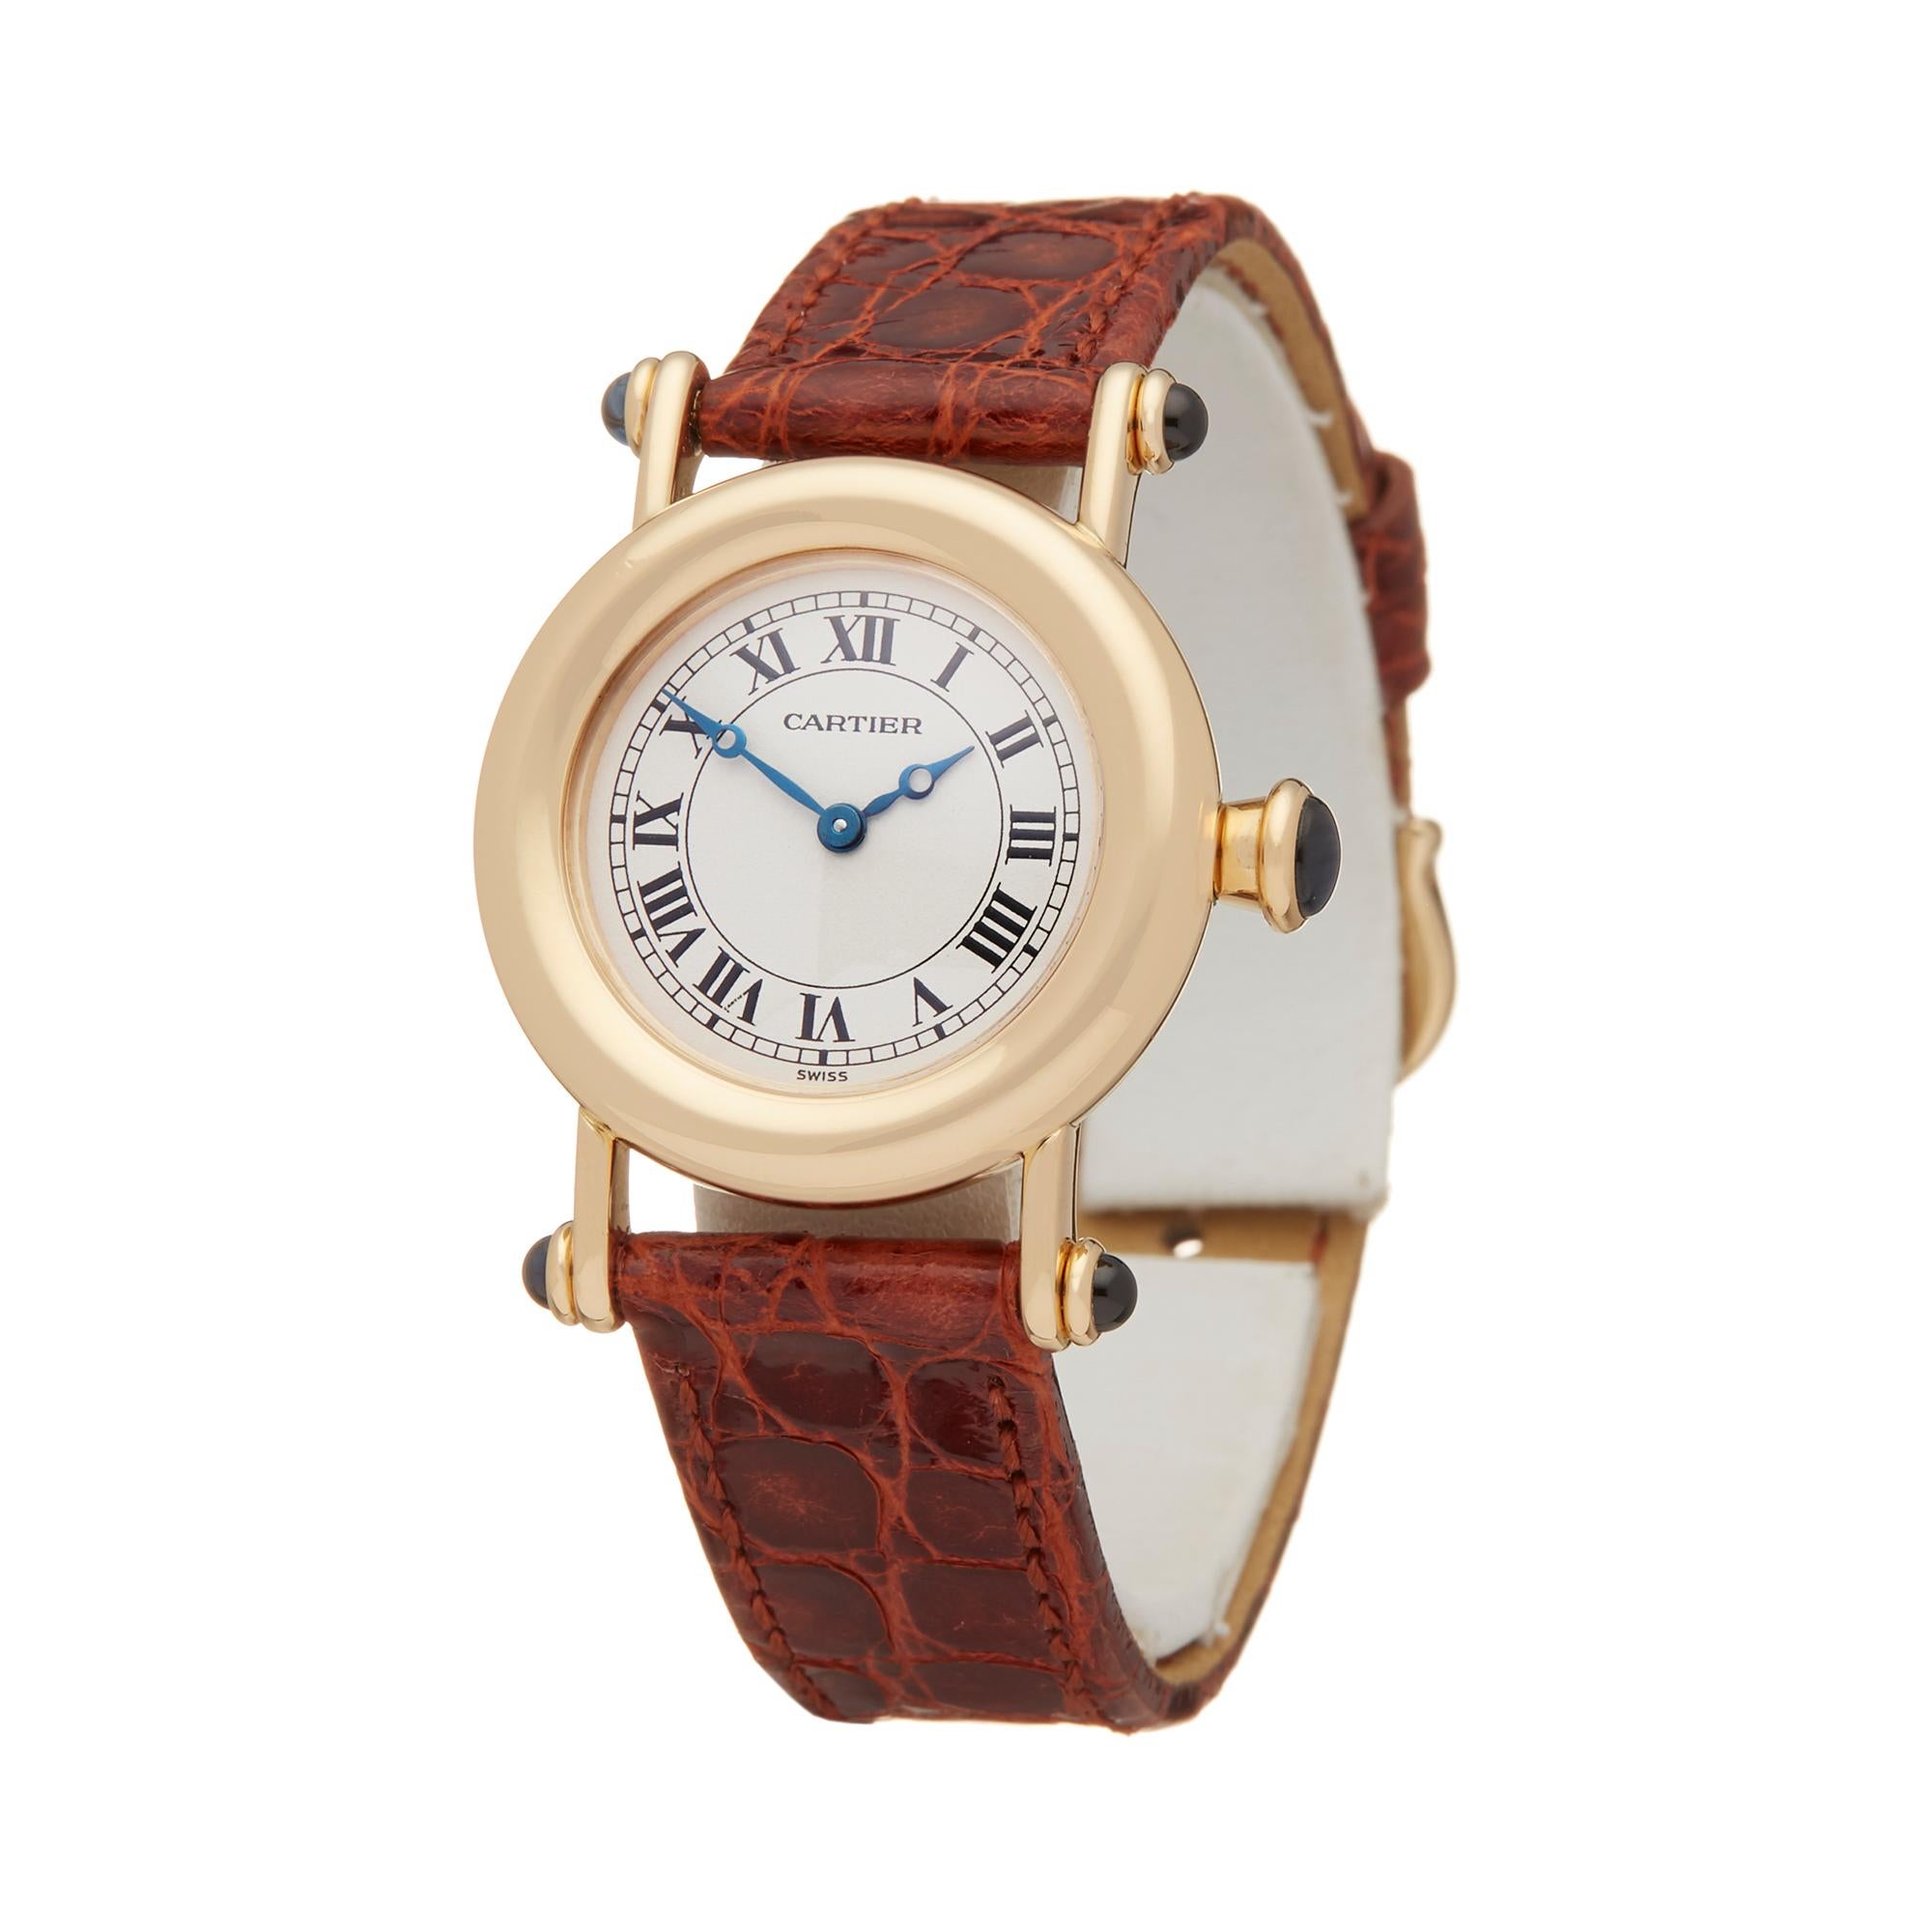 Reference: COM2063
Manufacturer: Cartier
Model: Diablo
Model Reference: 1440 W1507551
Age: 1st December 1994
Gender: Women's
Box and Papers: Box Manuals and Guarantee
Dial: White Roman
Glass: Sapphire Crystal
Movement: Quartz
Water Resistance: To